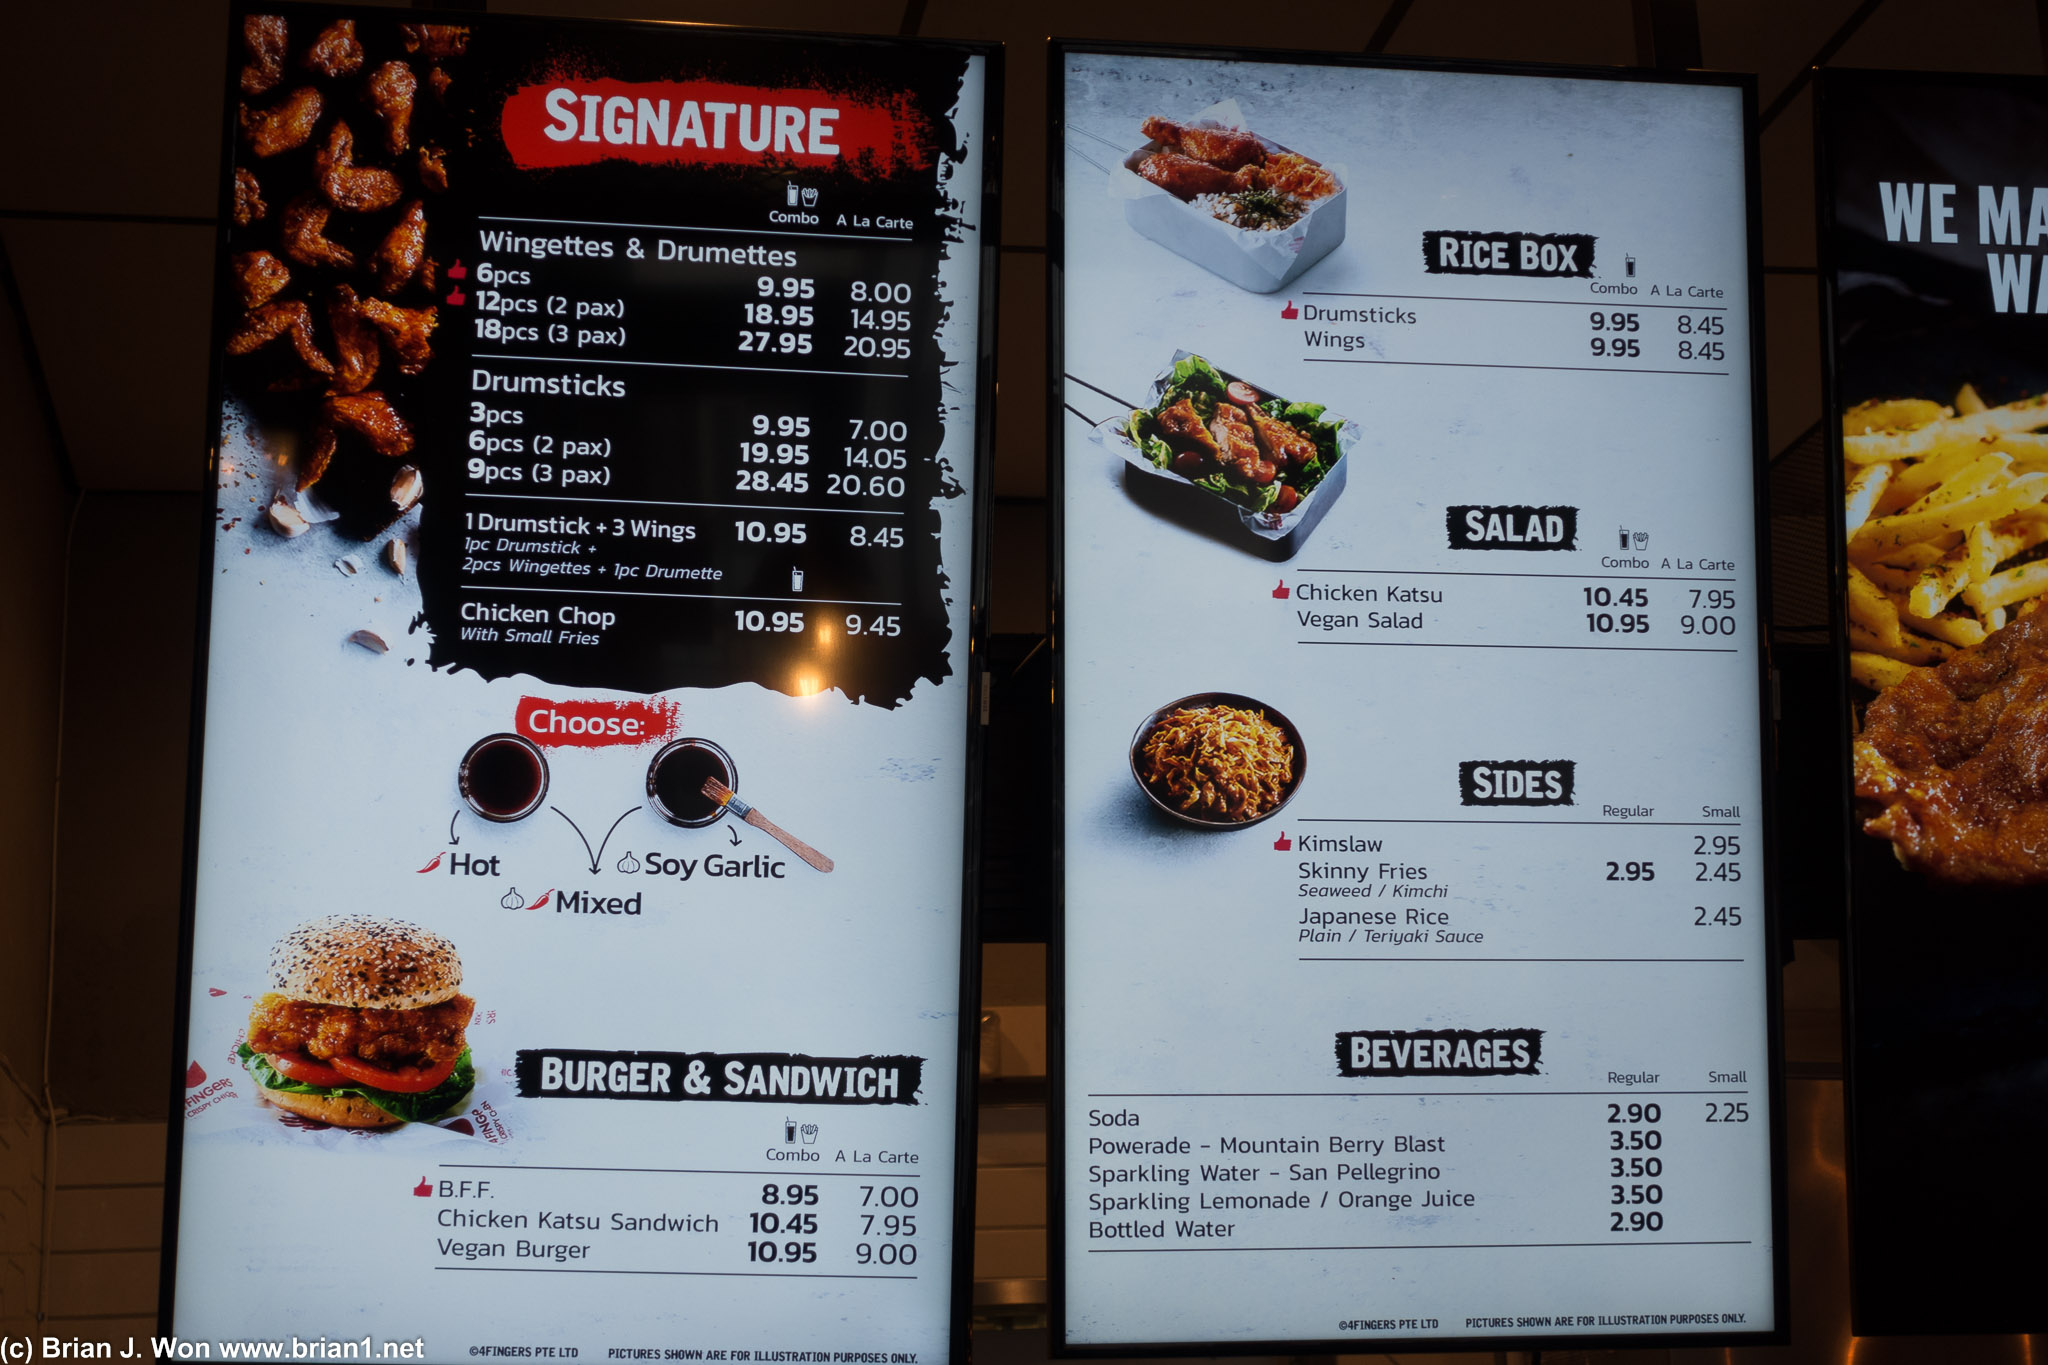 The menu. Kind of wish they had a 9-piece/10-piece wings option.